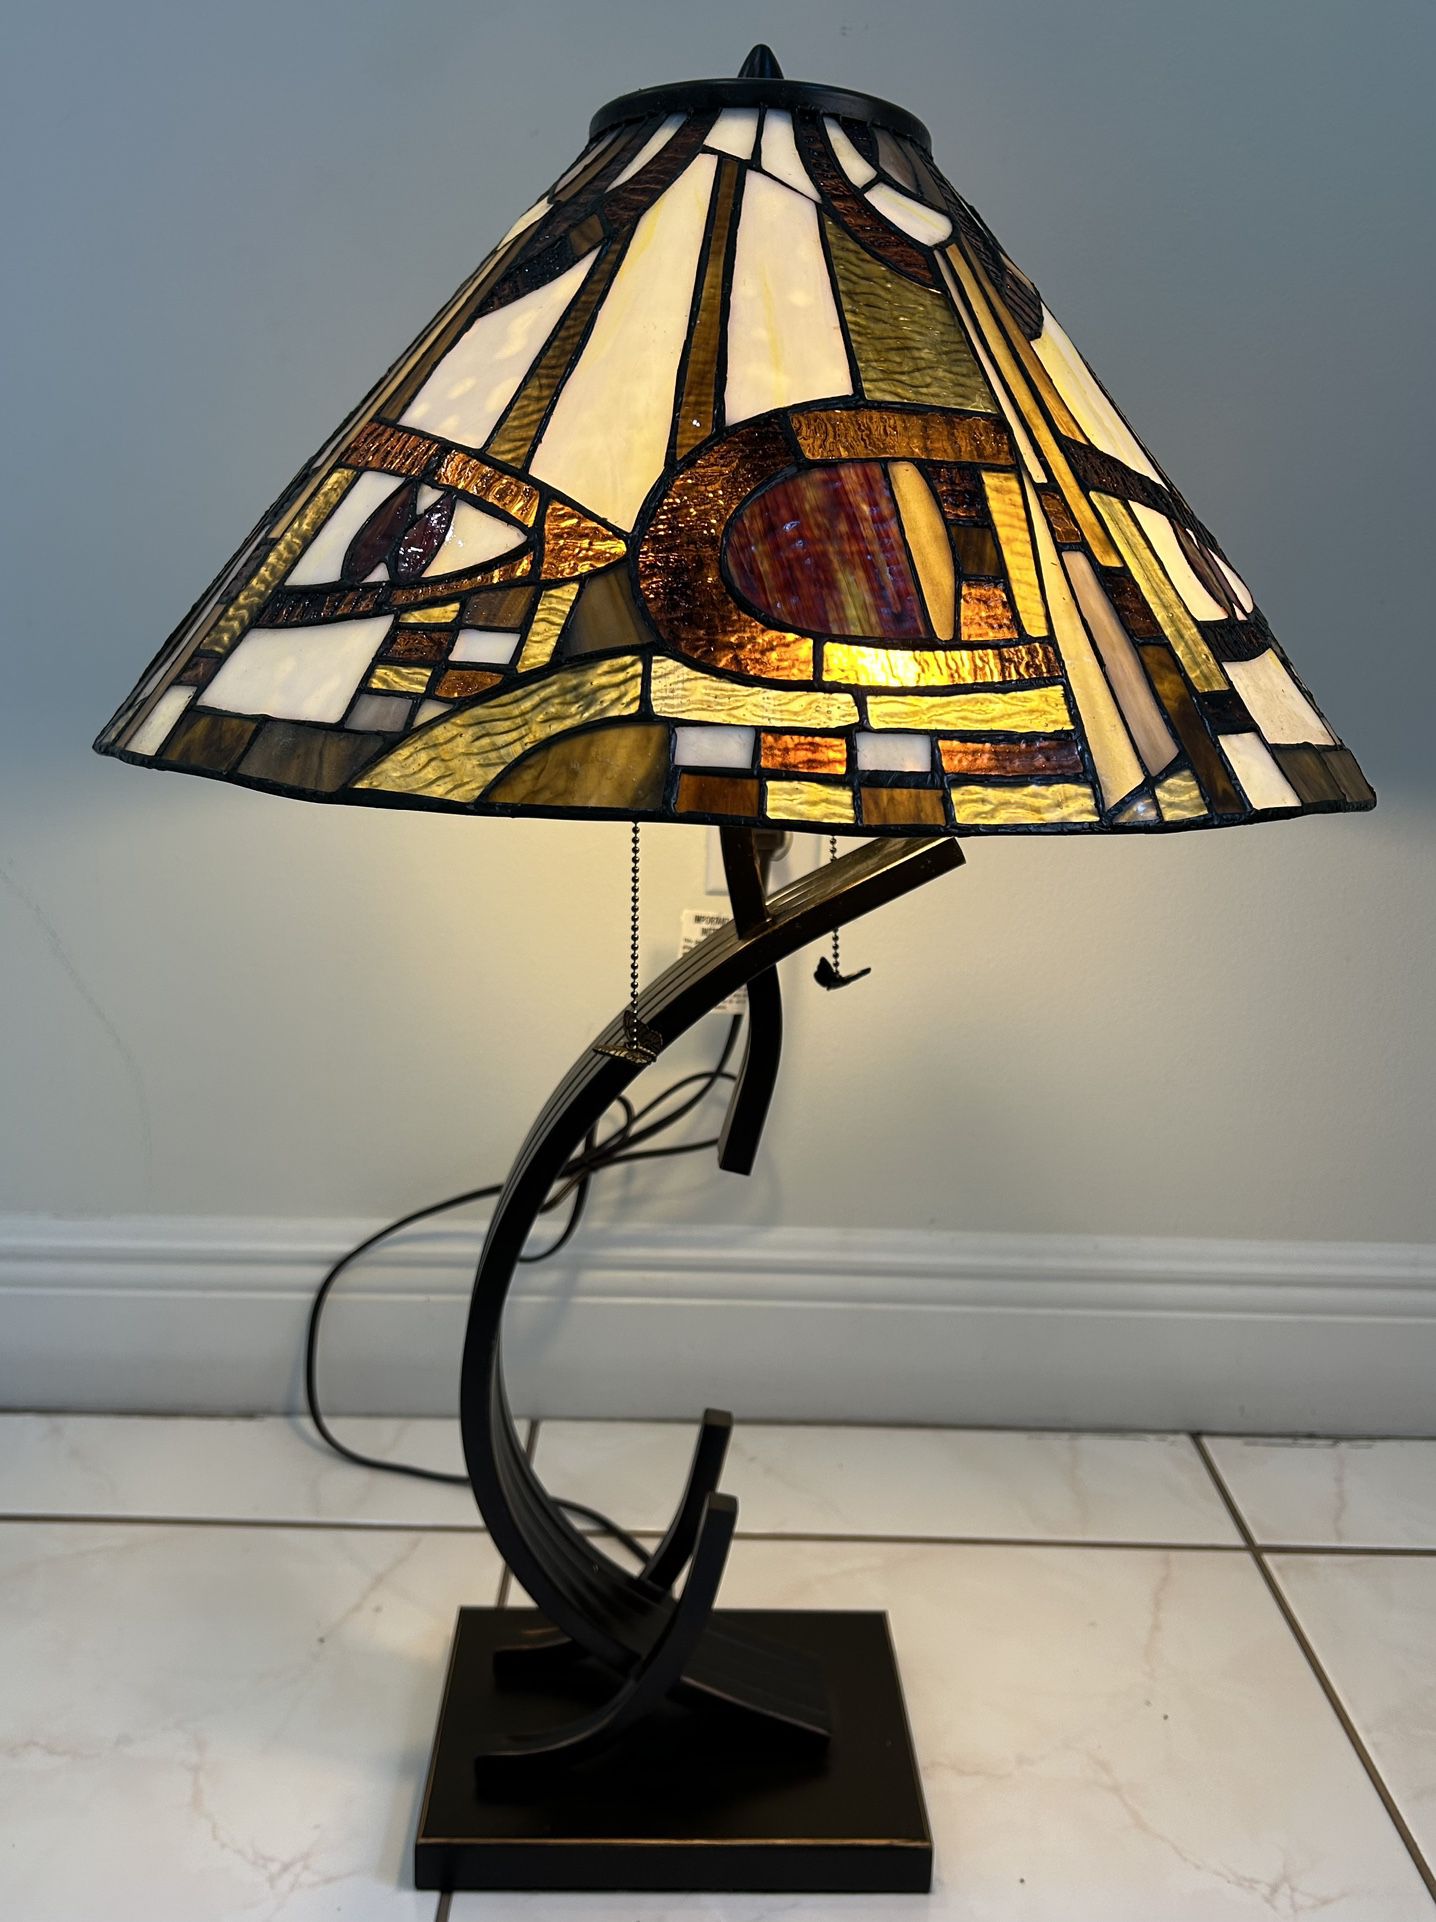 Color Creations Timeless Serenity Lamp